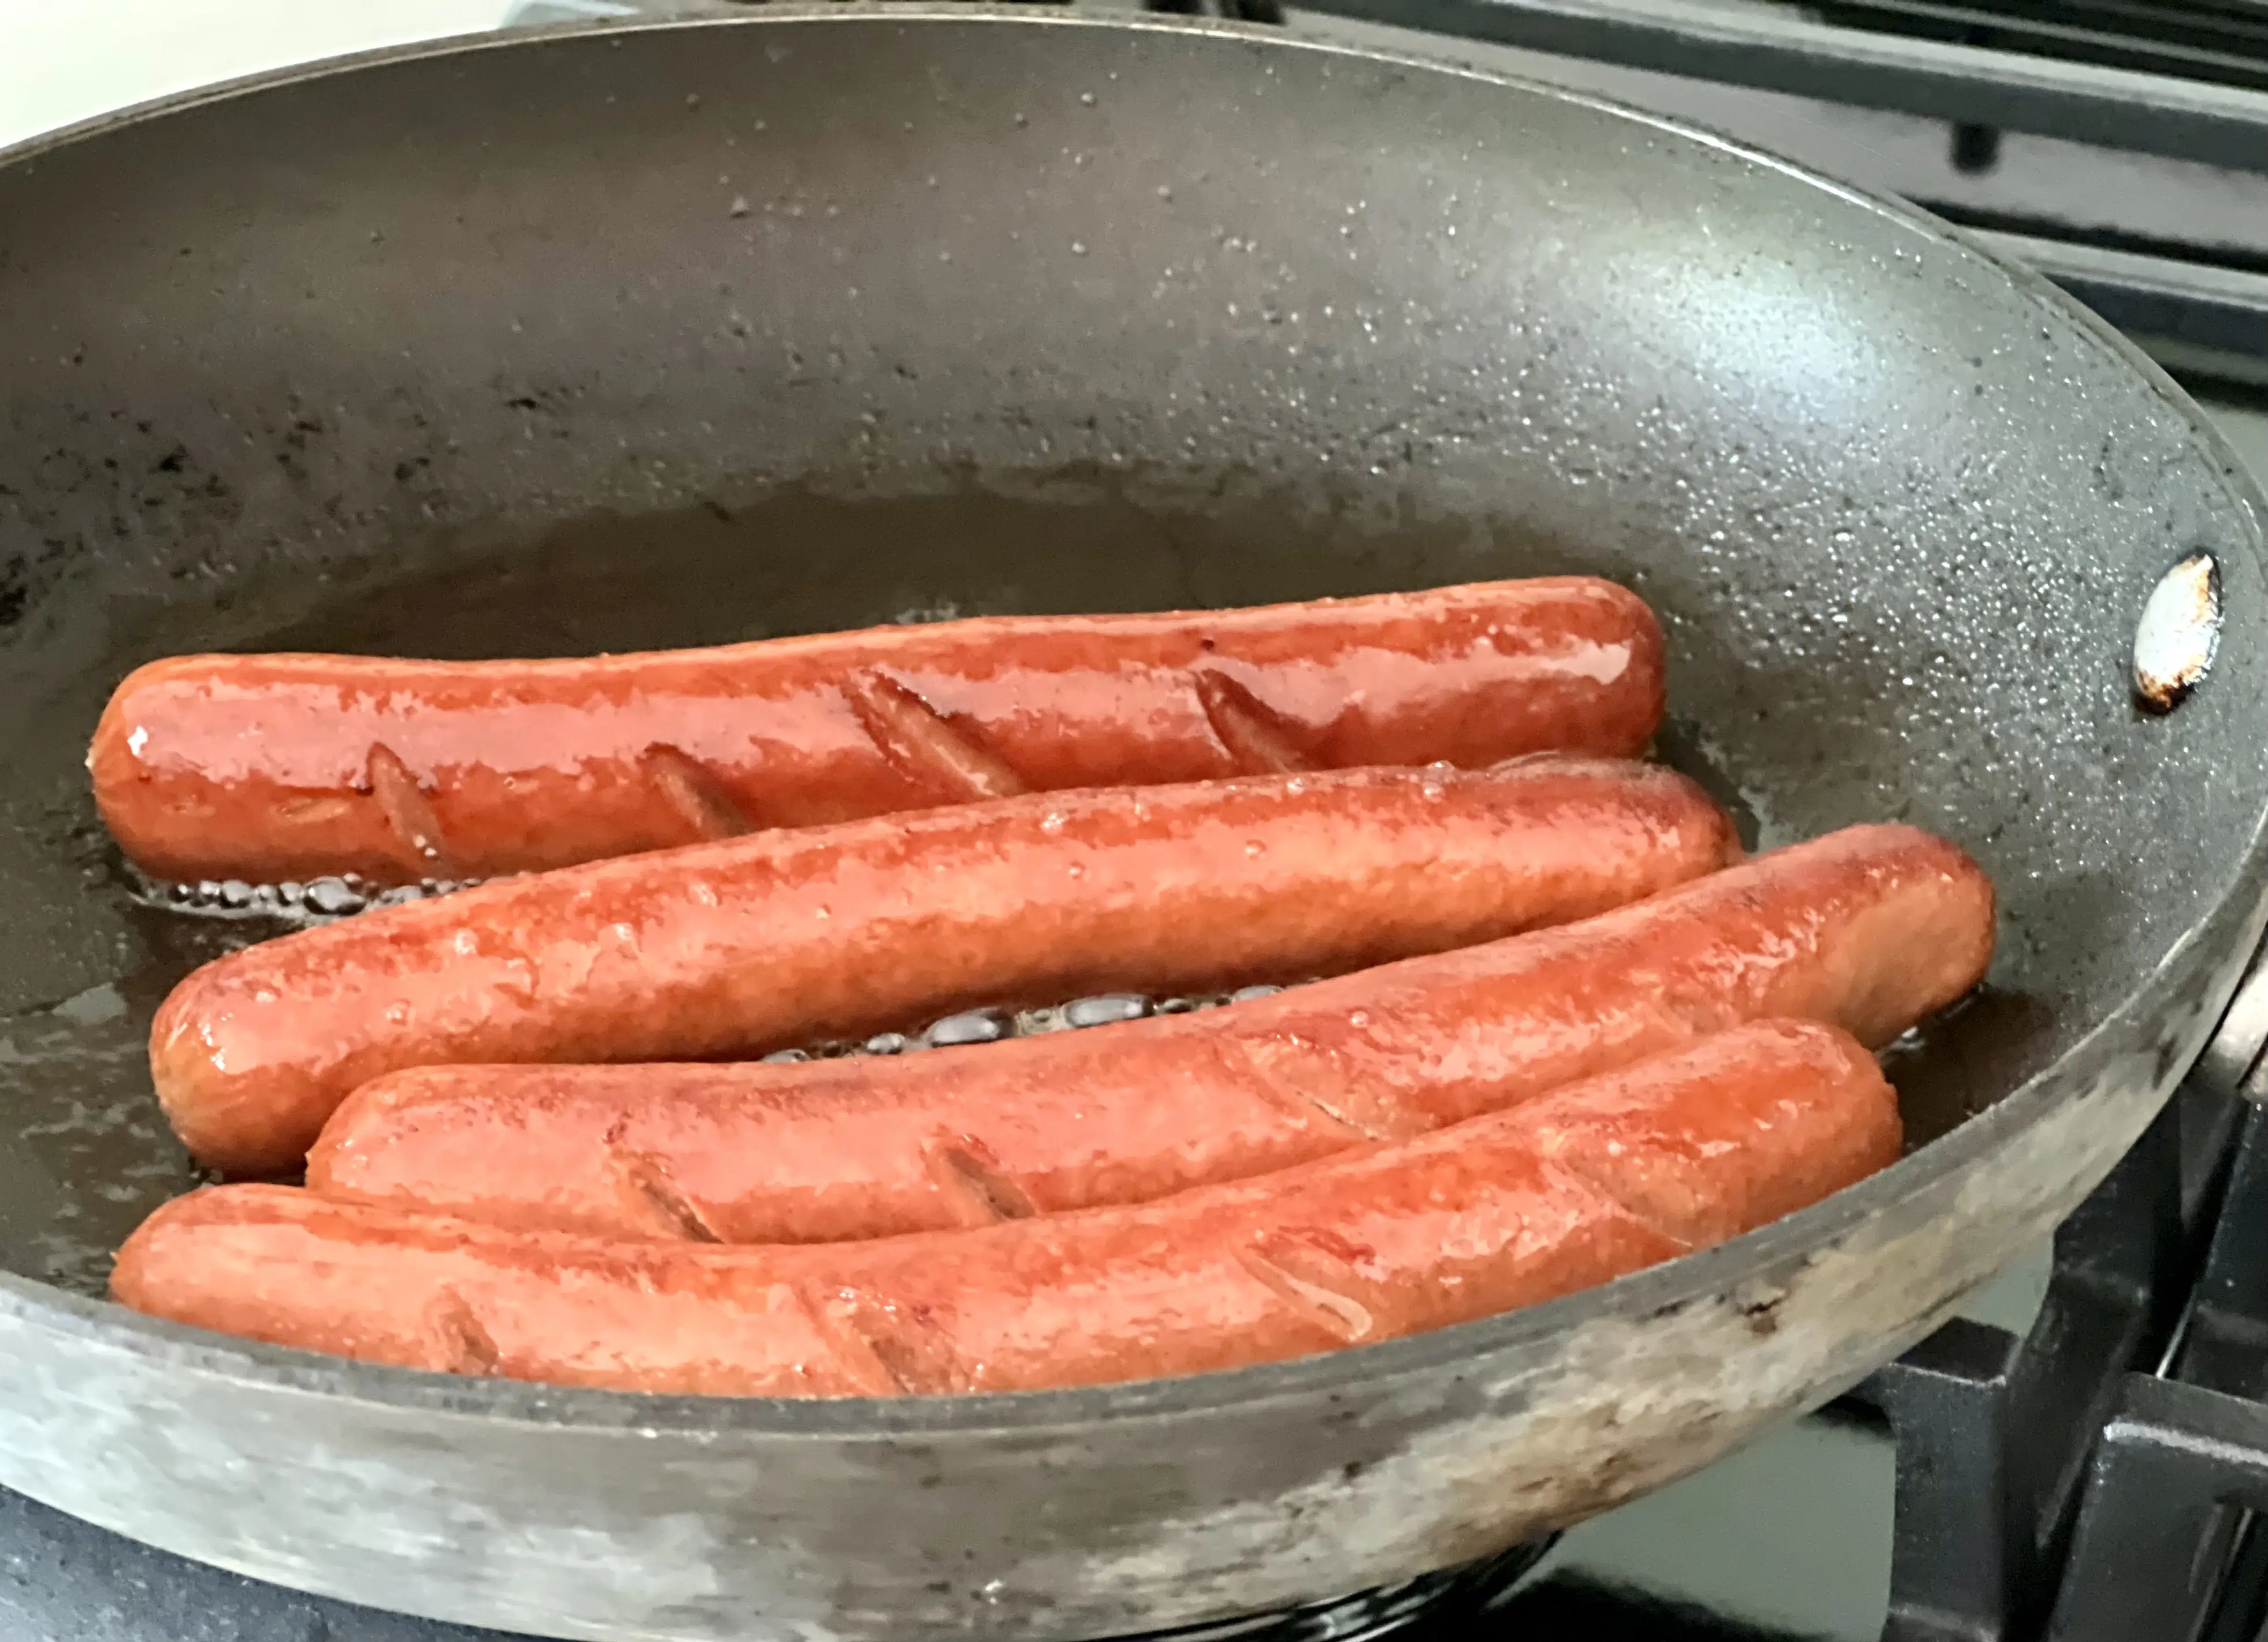 hot dogs cooking in a skillet